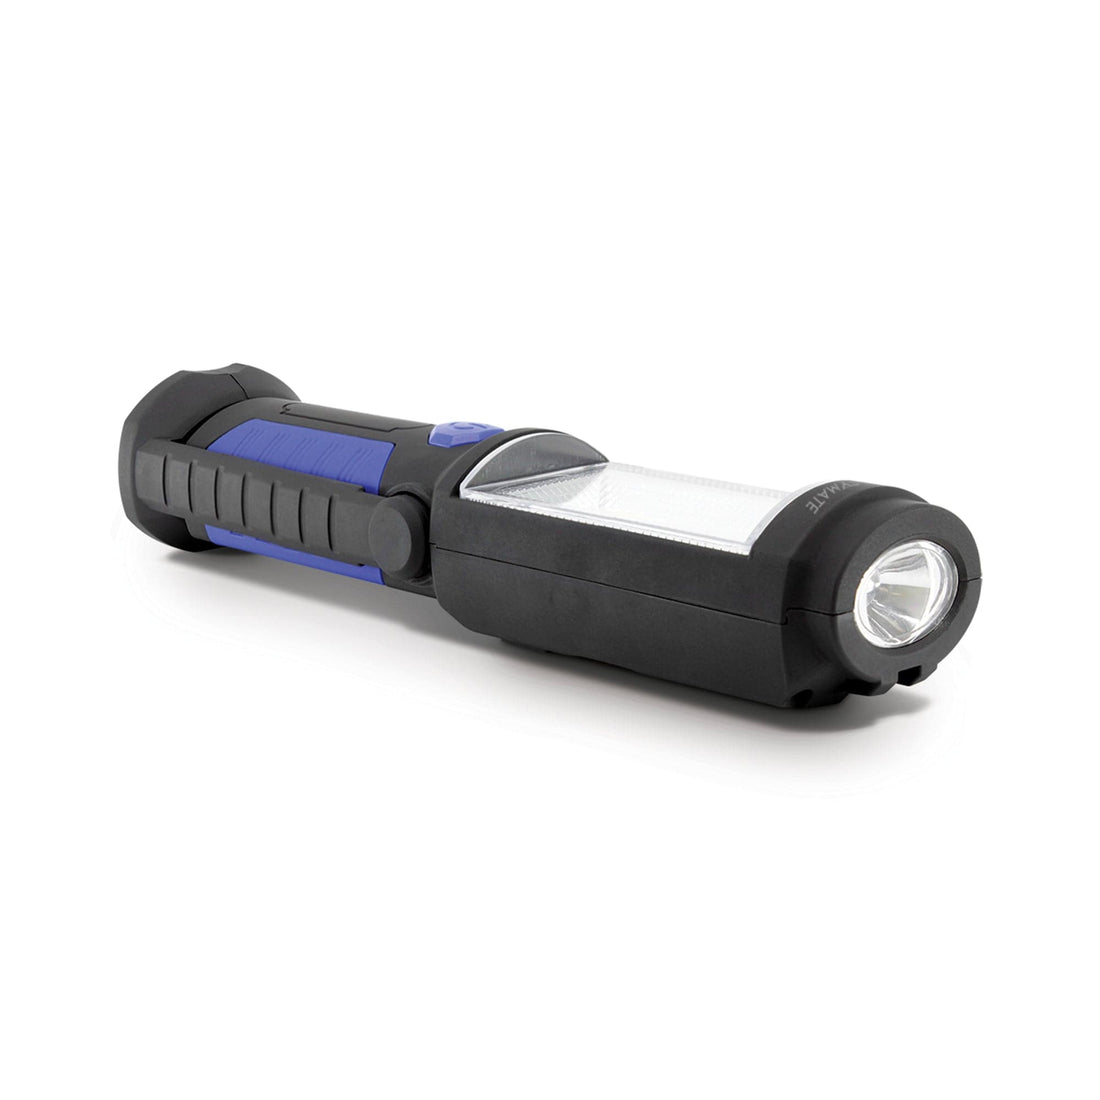 ULTRA BRIGHT SMD LED MULTIFUNCTION TORCH